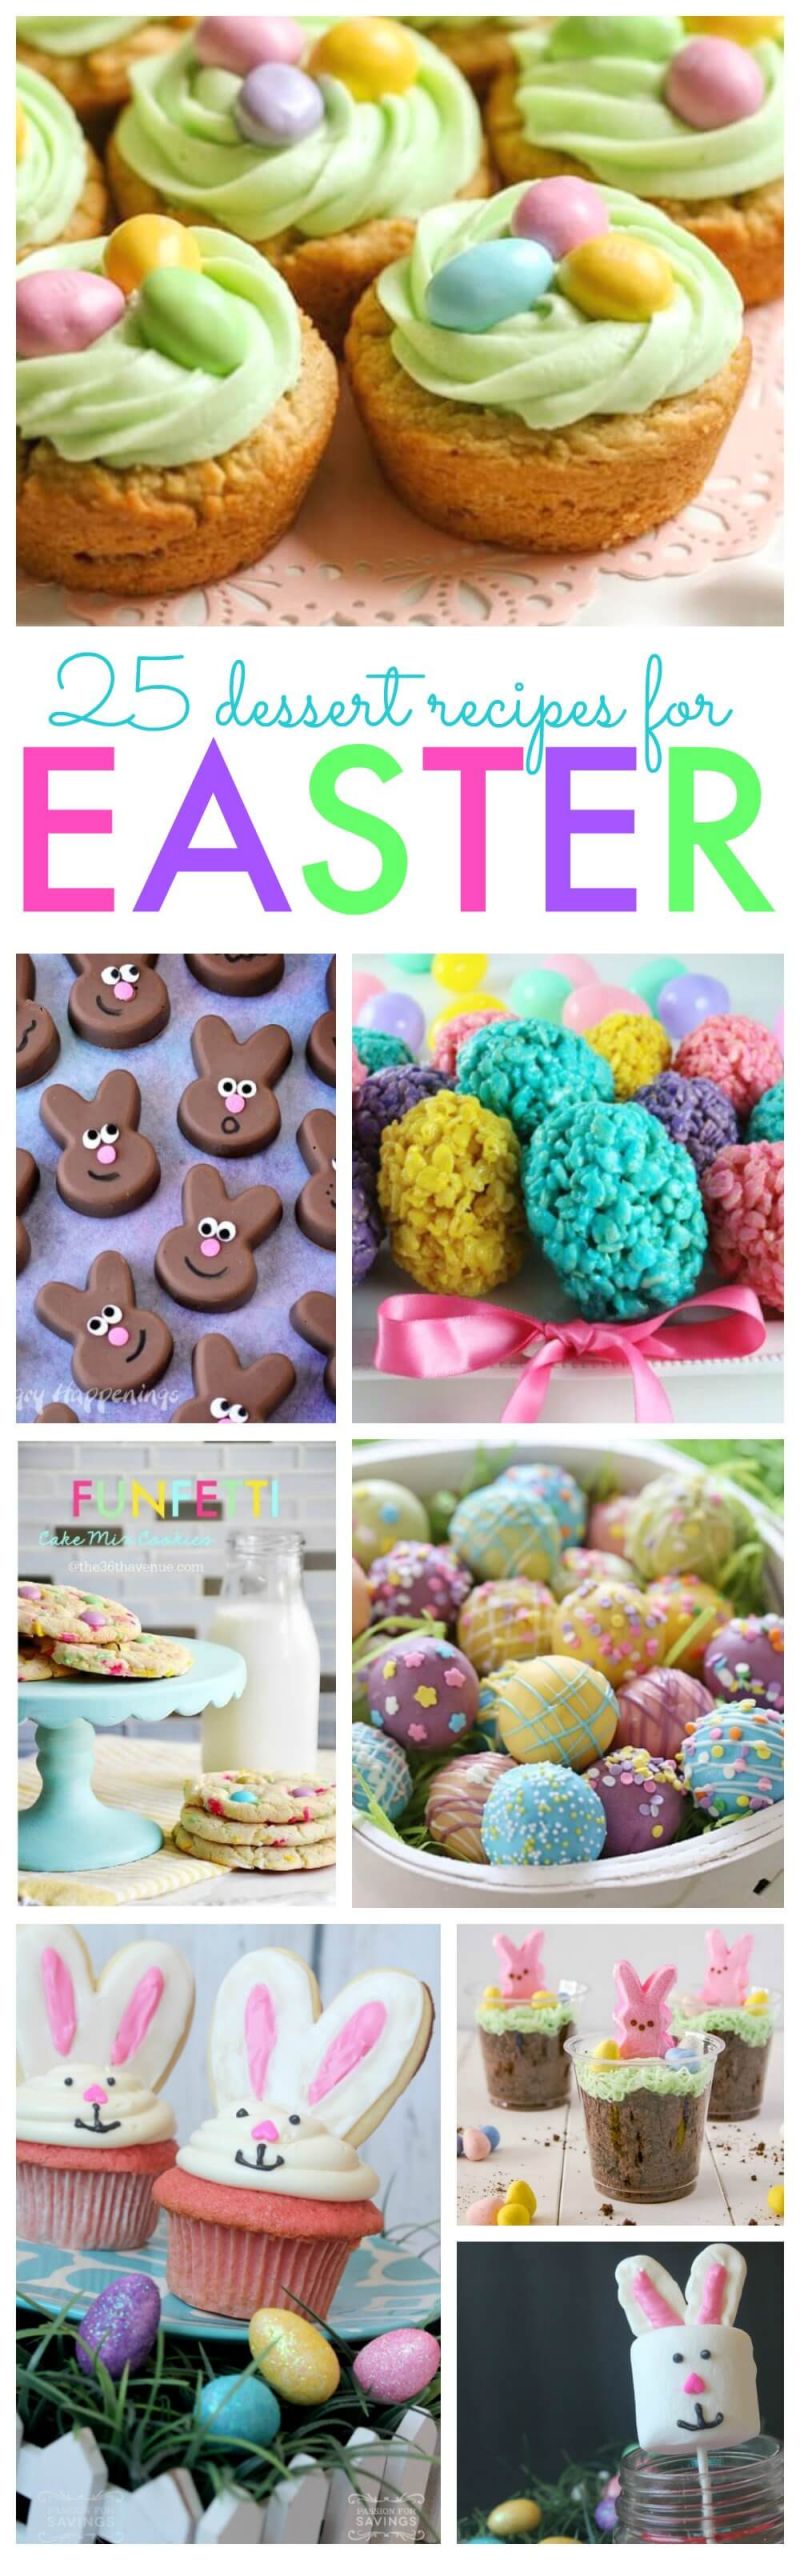 Easter Party Dessert Ideas
 Easter Desserts Your Family Will Love